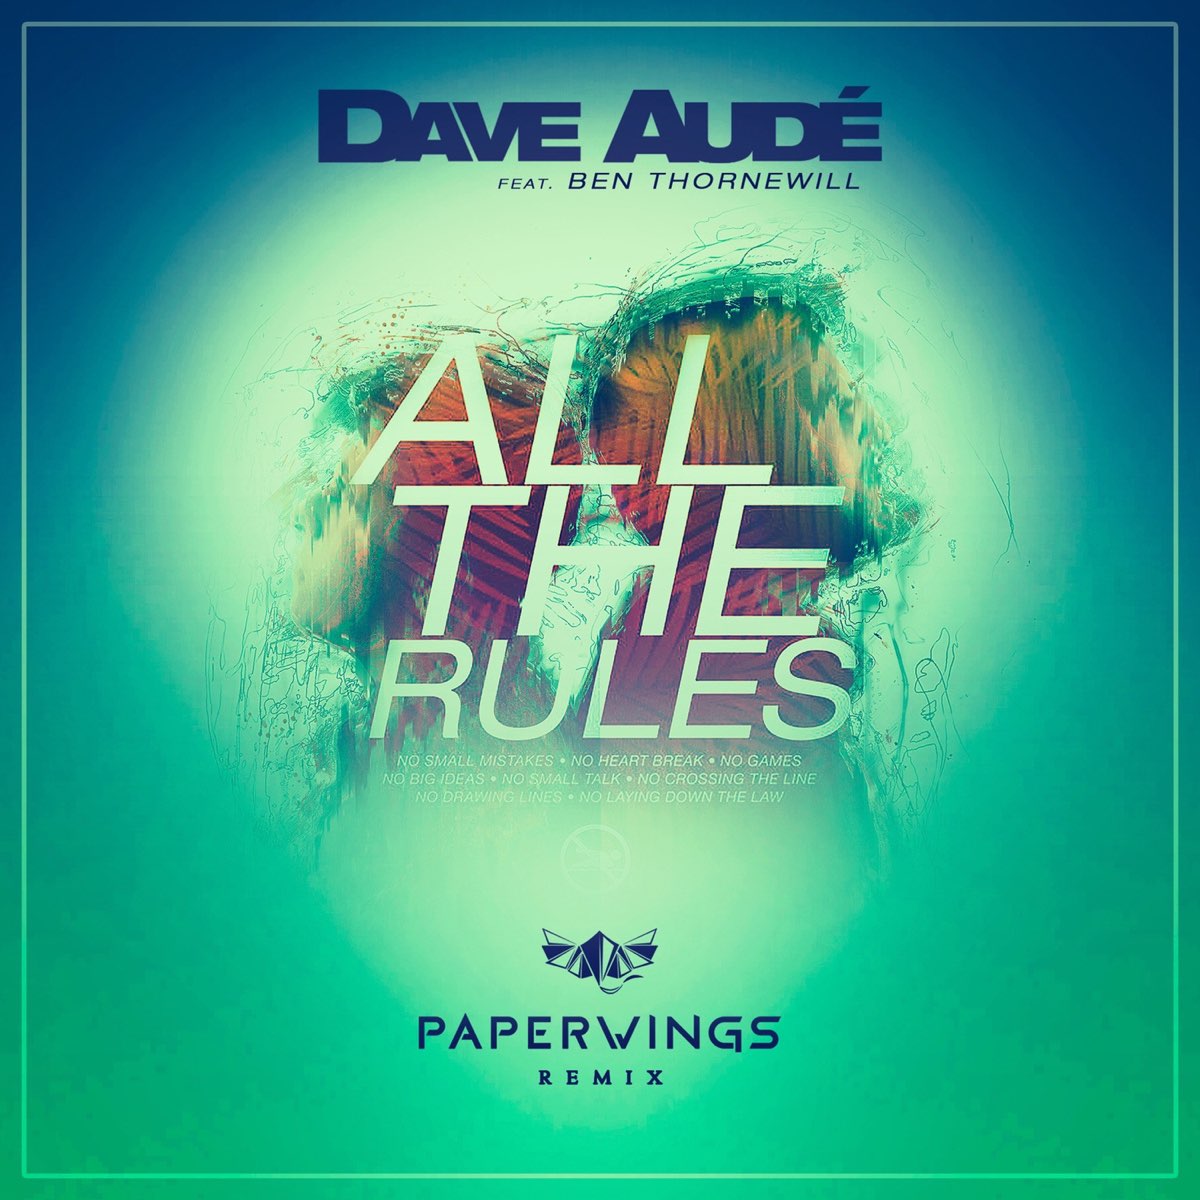 Dave Aude. Dave Rules. How it go Ben feat. Benny feat